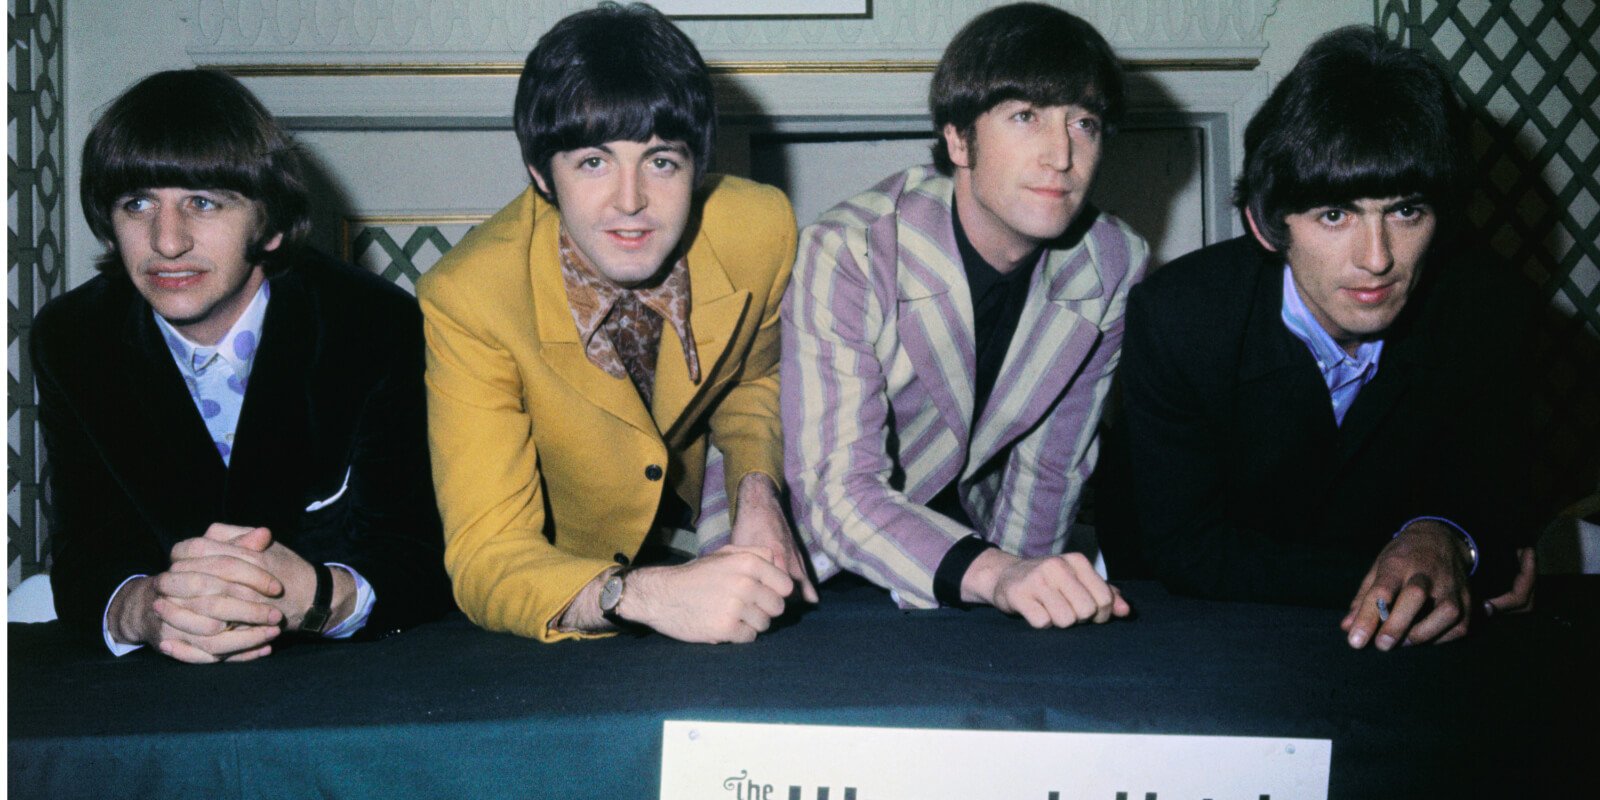 The Beatles wrote many of their most iconic songs about using weed.